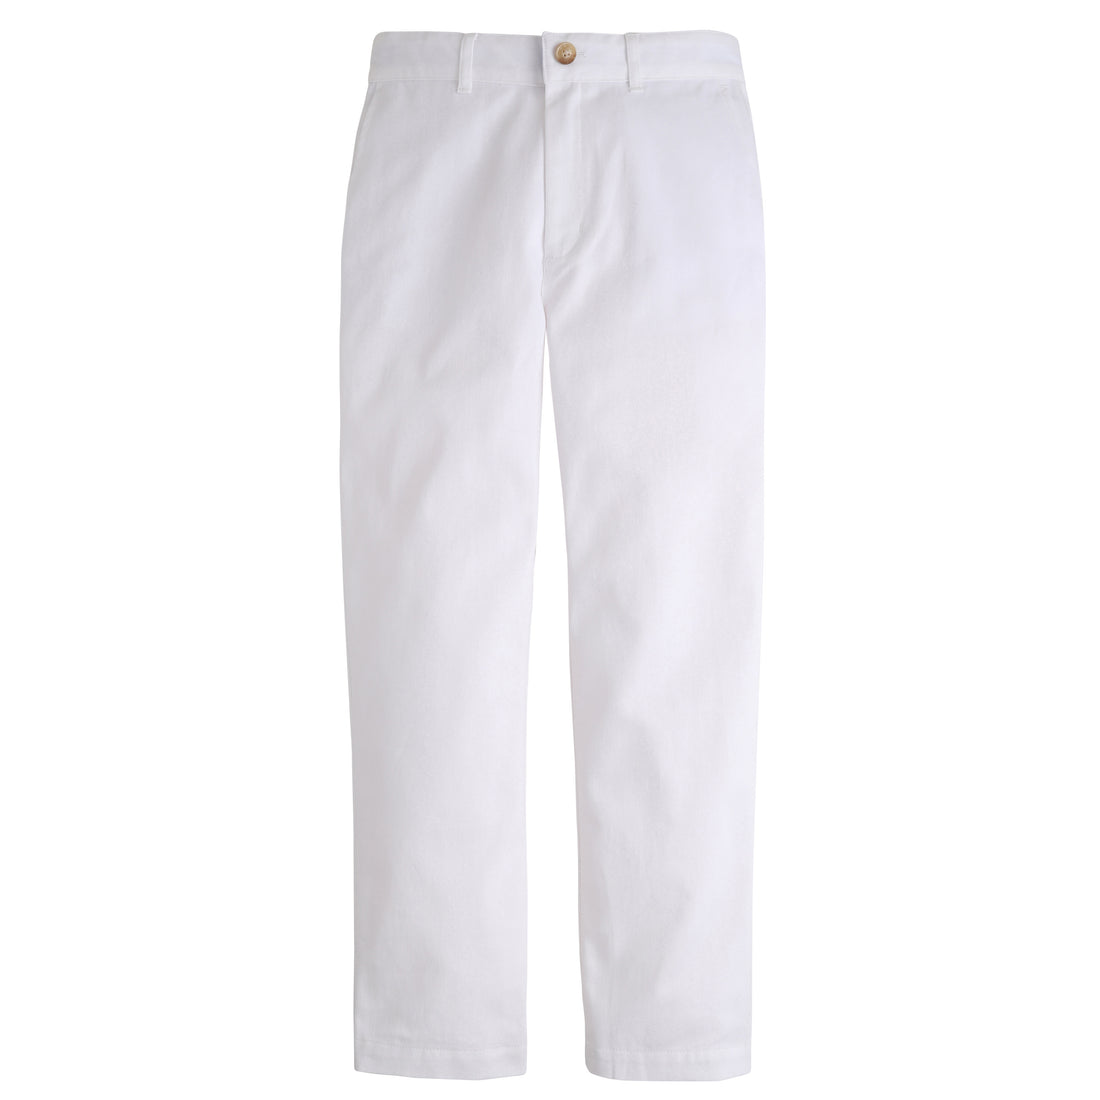 Little English classic pant for boys, faux button closure with zipper and interior elastic adjuster, white twill pant with belt loops for older boys